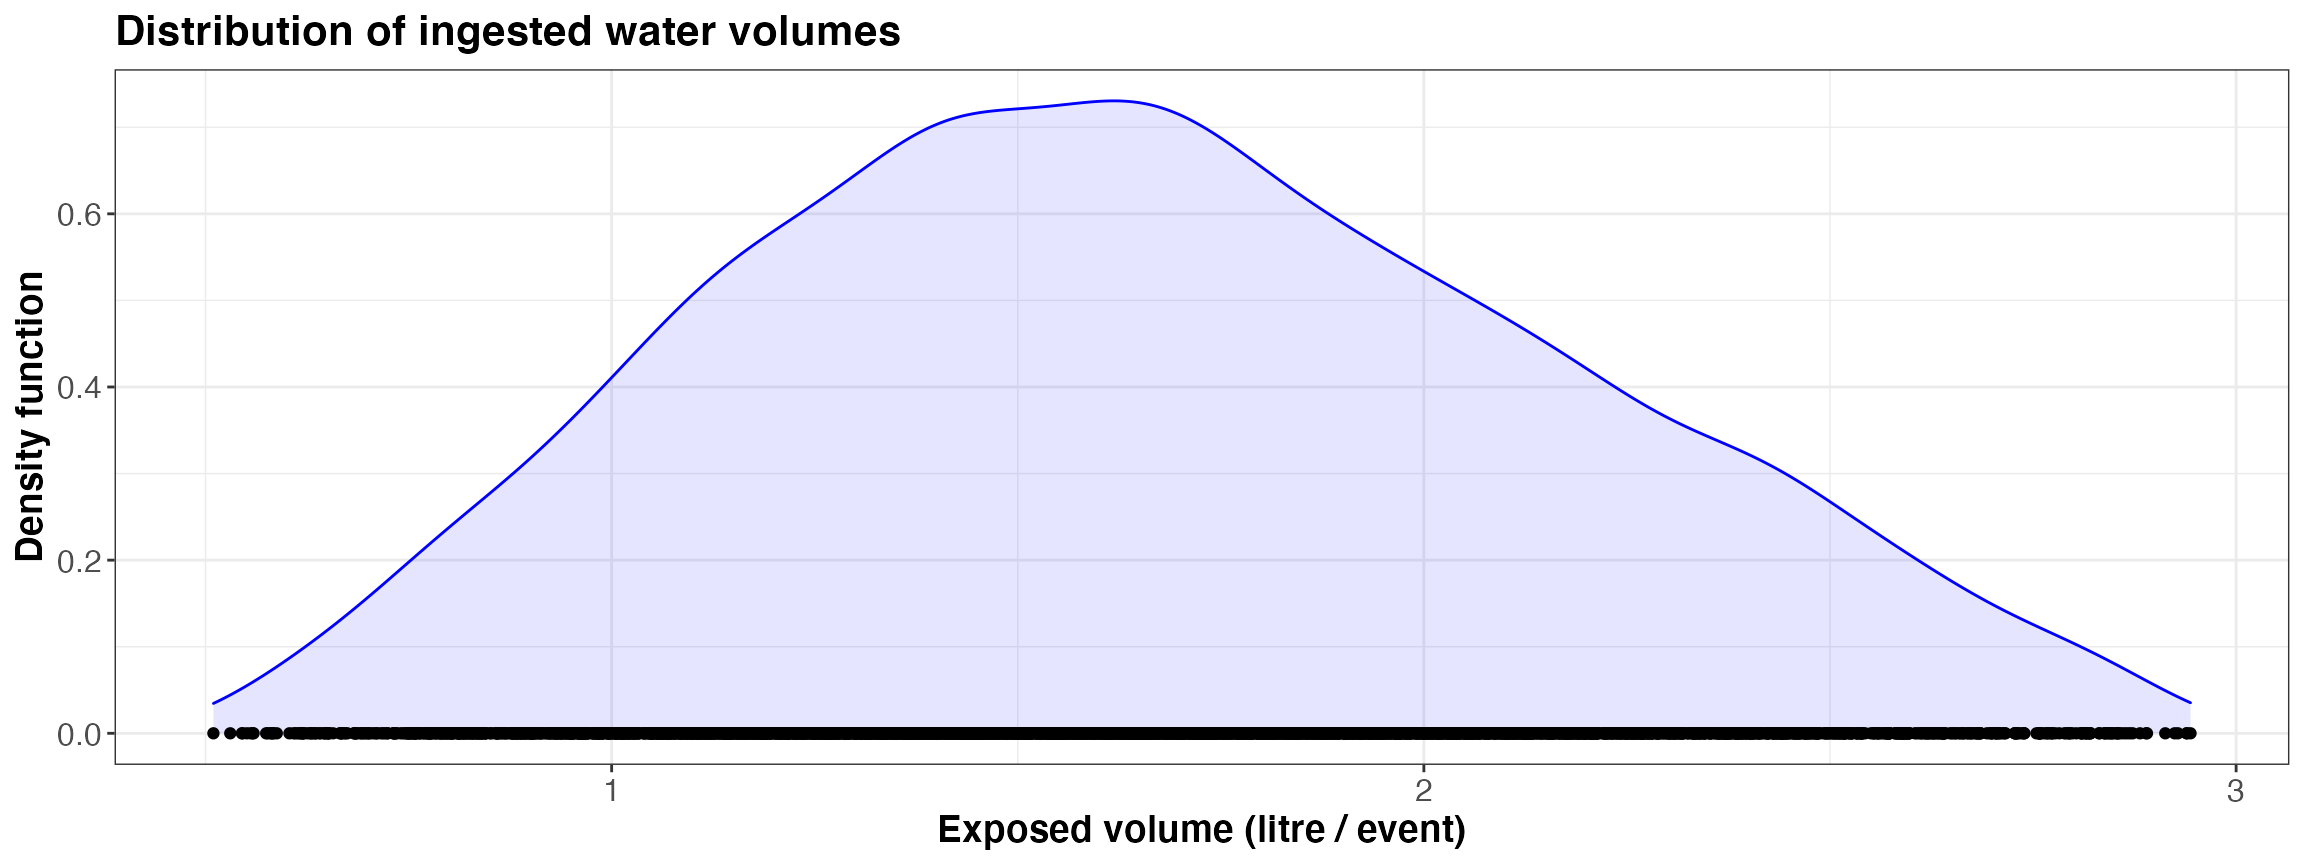 Simulated ingested volume per event